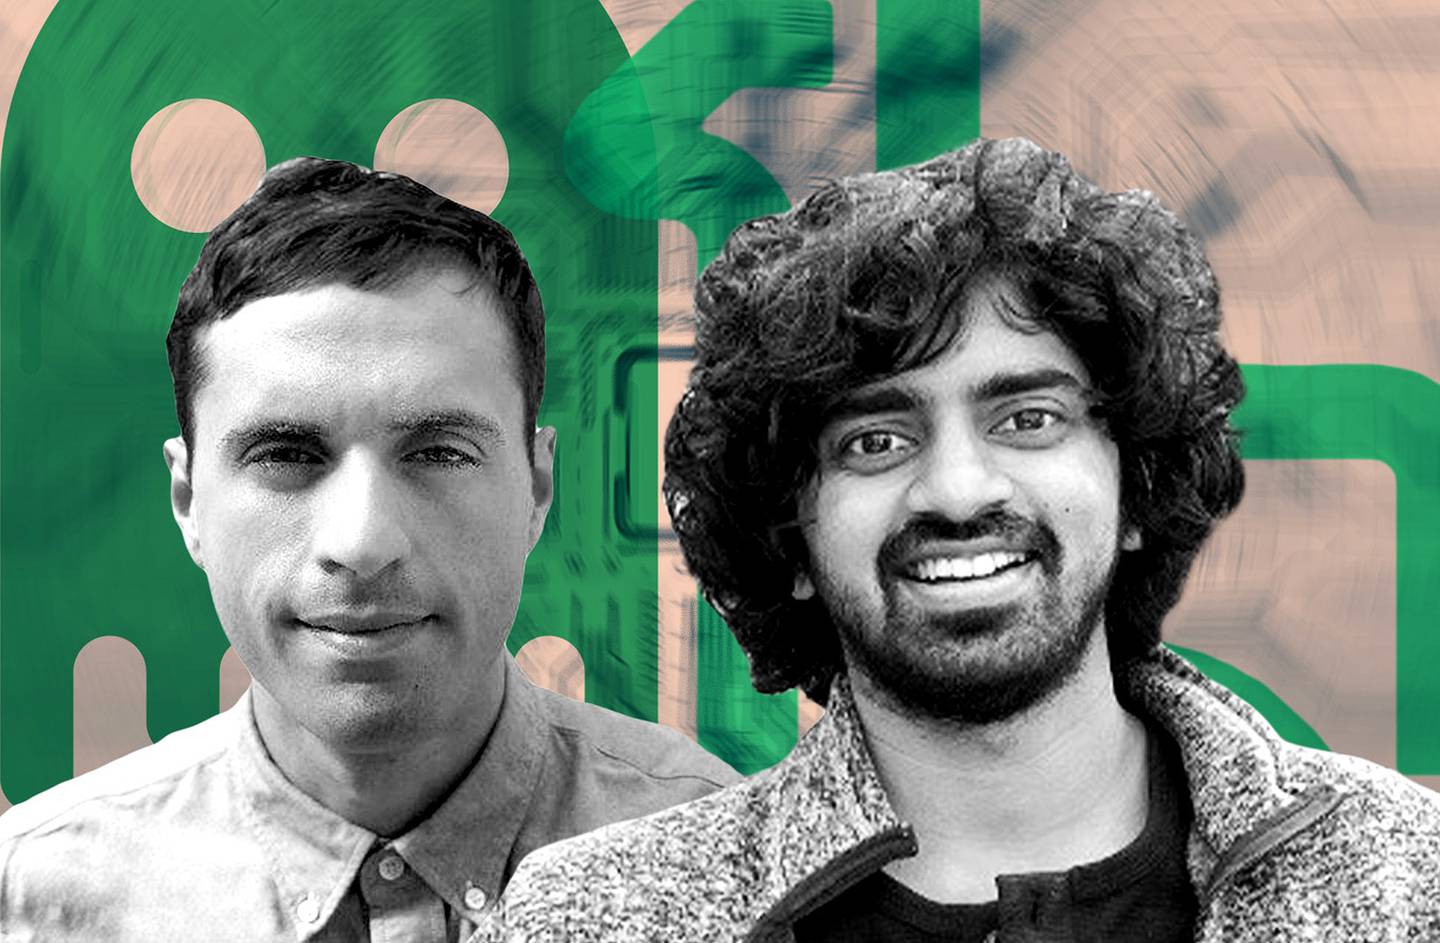 Portrait of Marc Zeller and Shreyas Hariharan, with superimposed Aave and Llama logos on a background of a blurred circuit board.